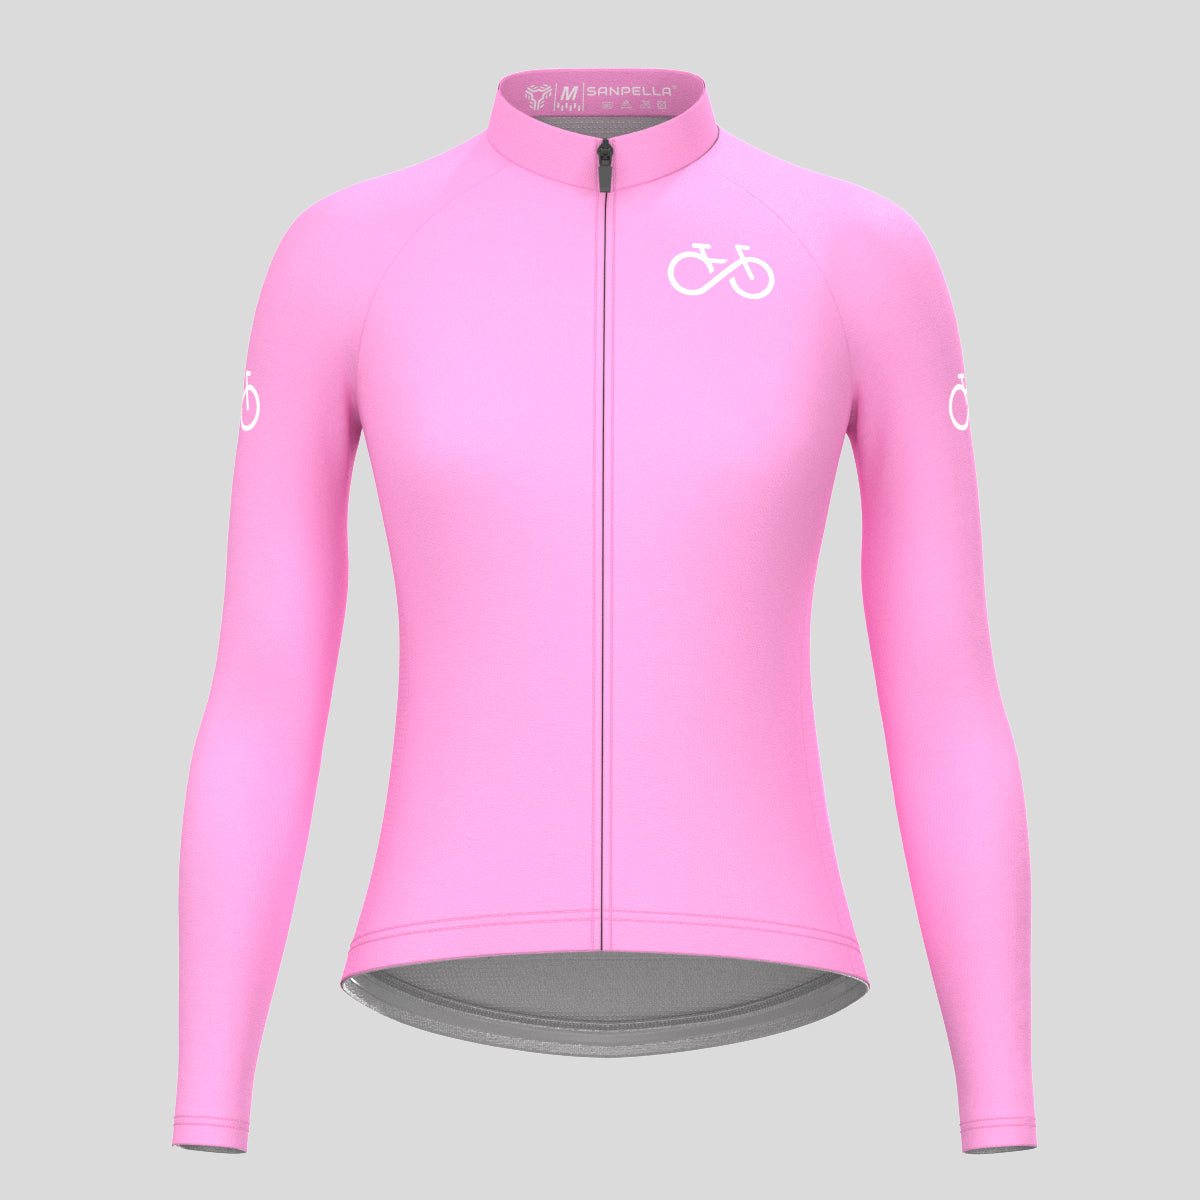 Ride Forever Women's LS Cycling Jersey - Neo Pink